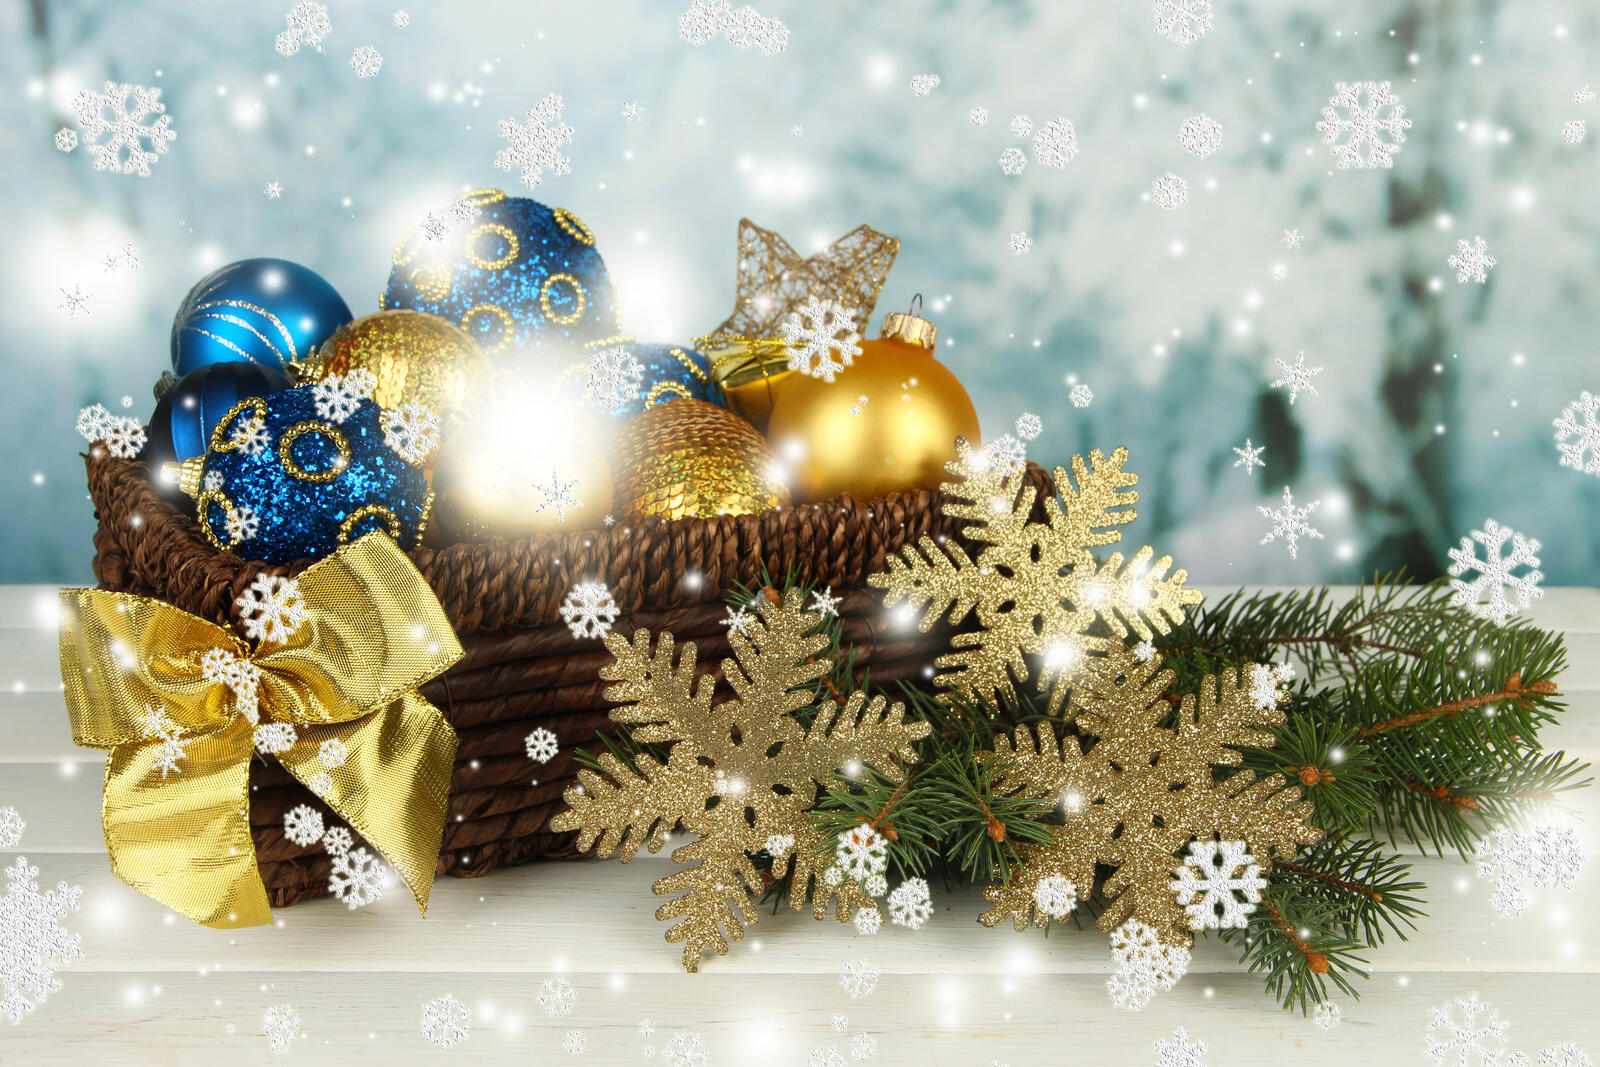 Wallpapers background decorations Christmas on the desktop